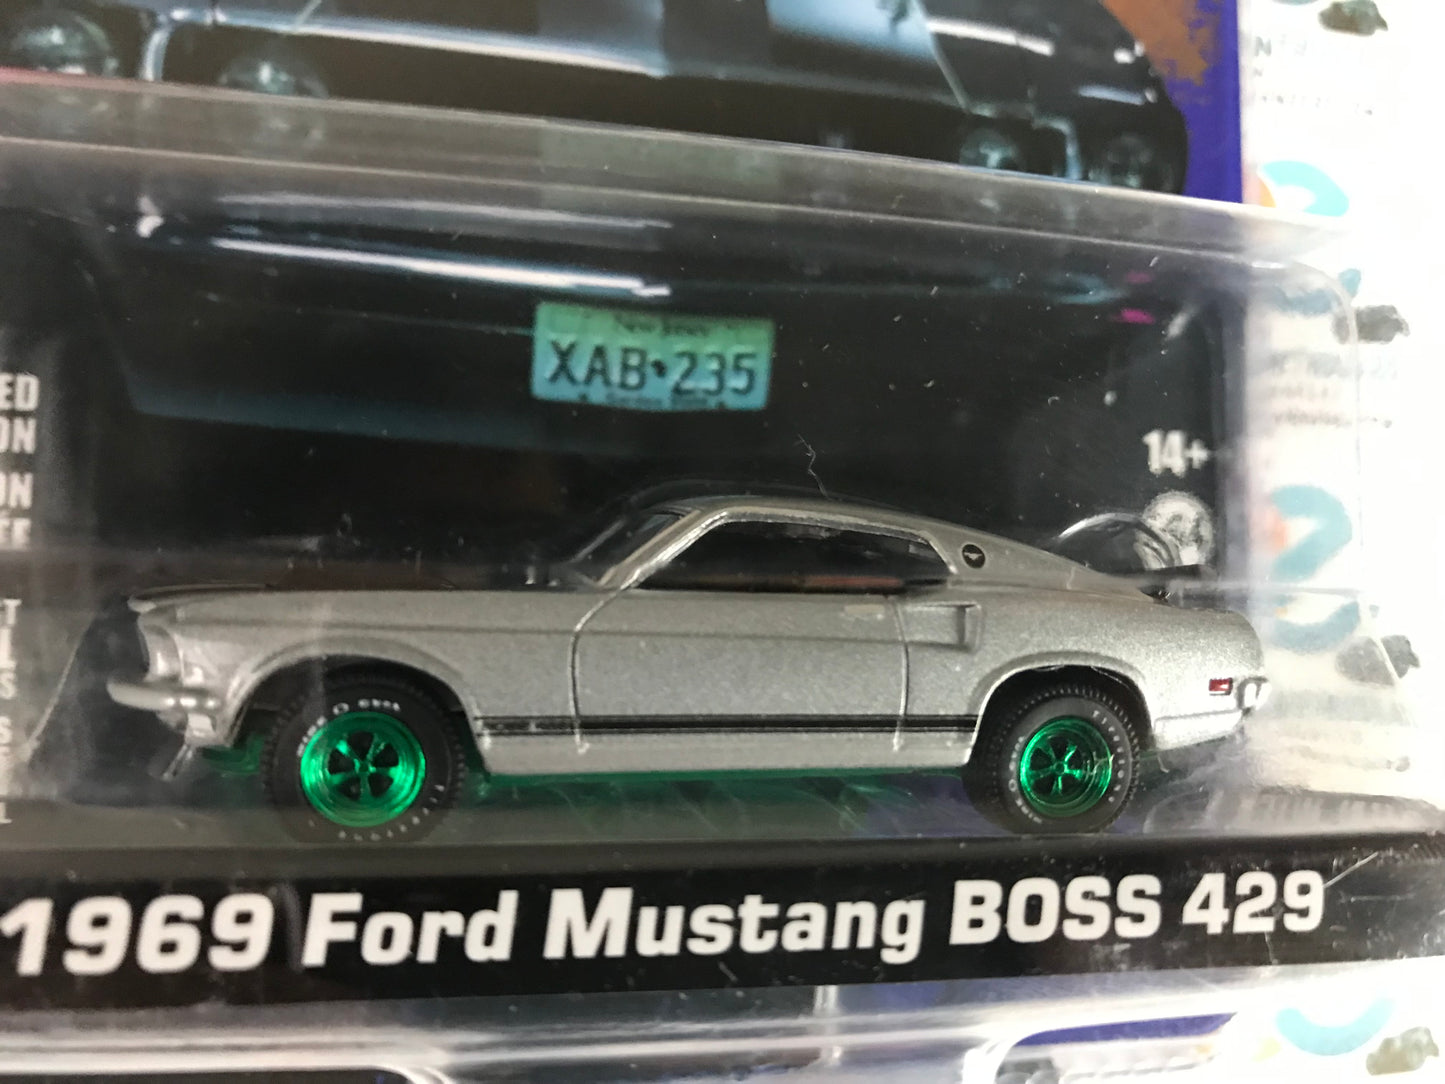 CHASE GREEN MACHINES Greenlight John Wick 1969 Ford Mustang BOSS 429 Silver 1:64